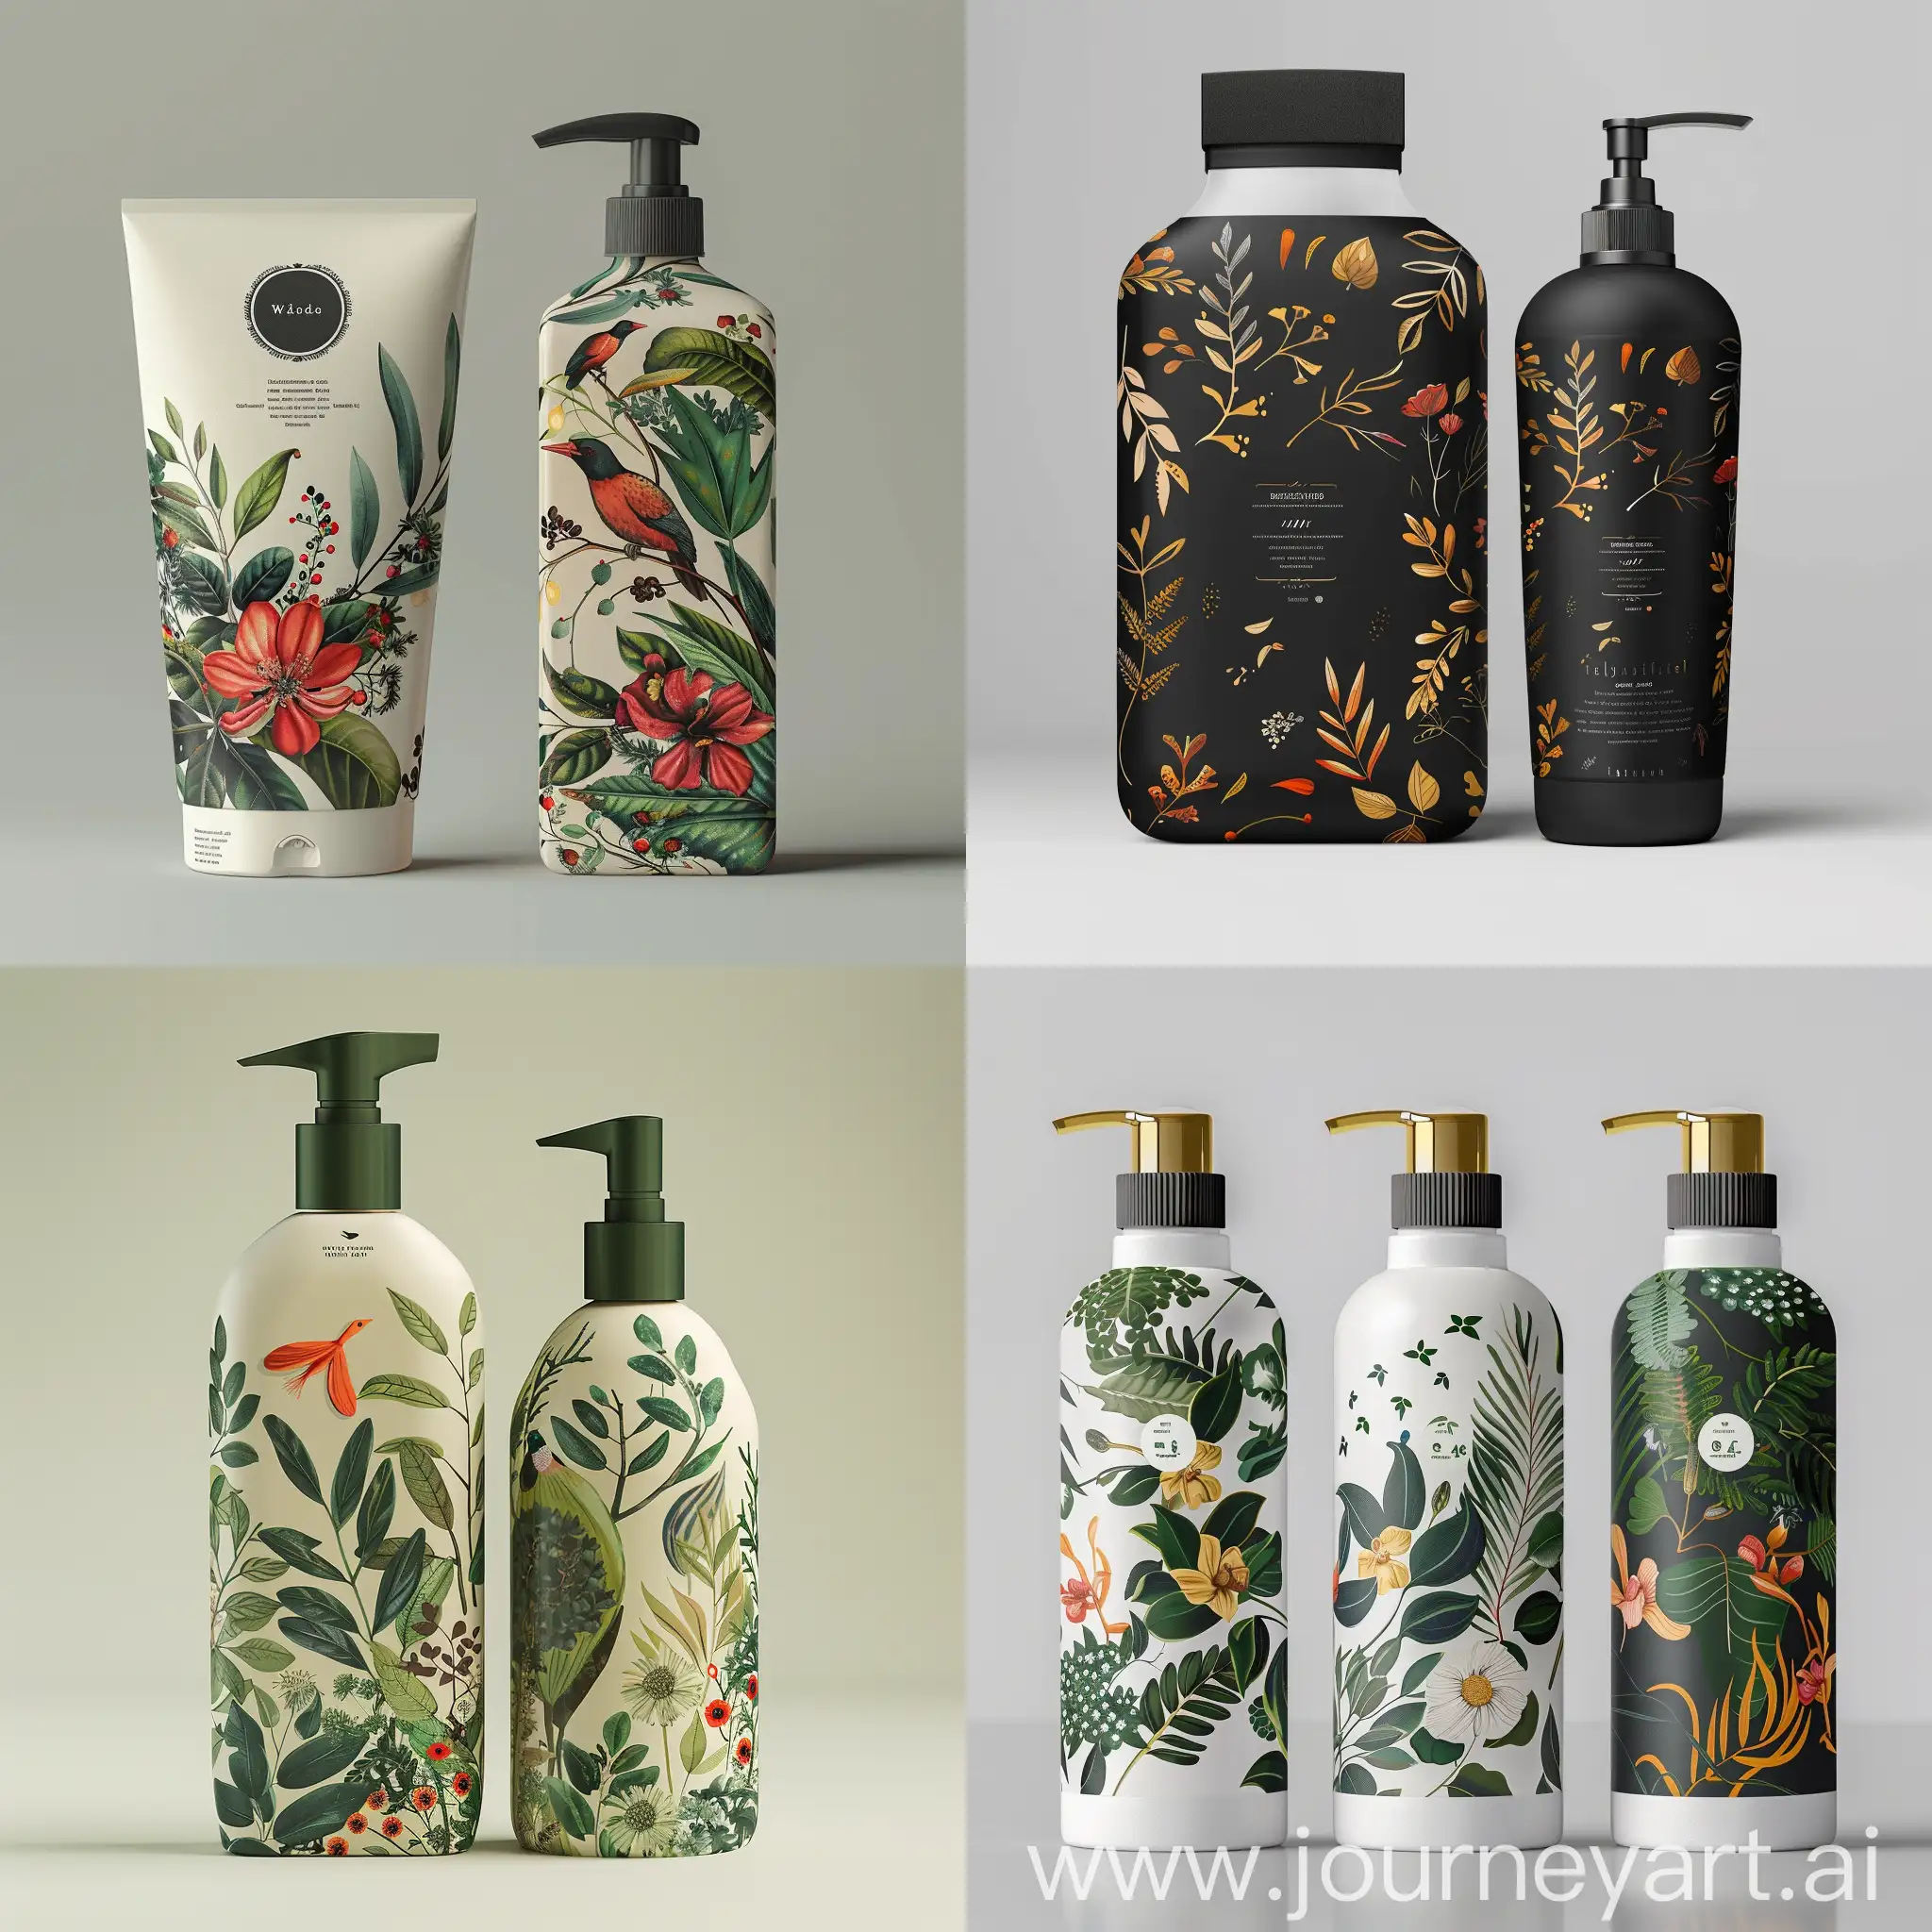 Premium-Class-Gel-Shower-and-Shampoo-Packaging-in-Modern-Graphic-Style